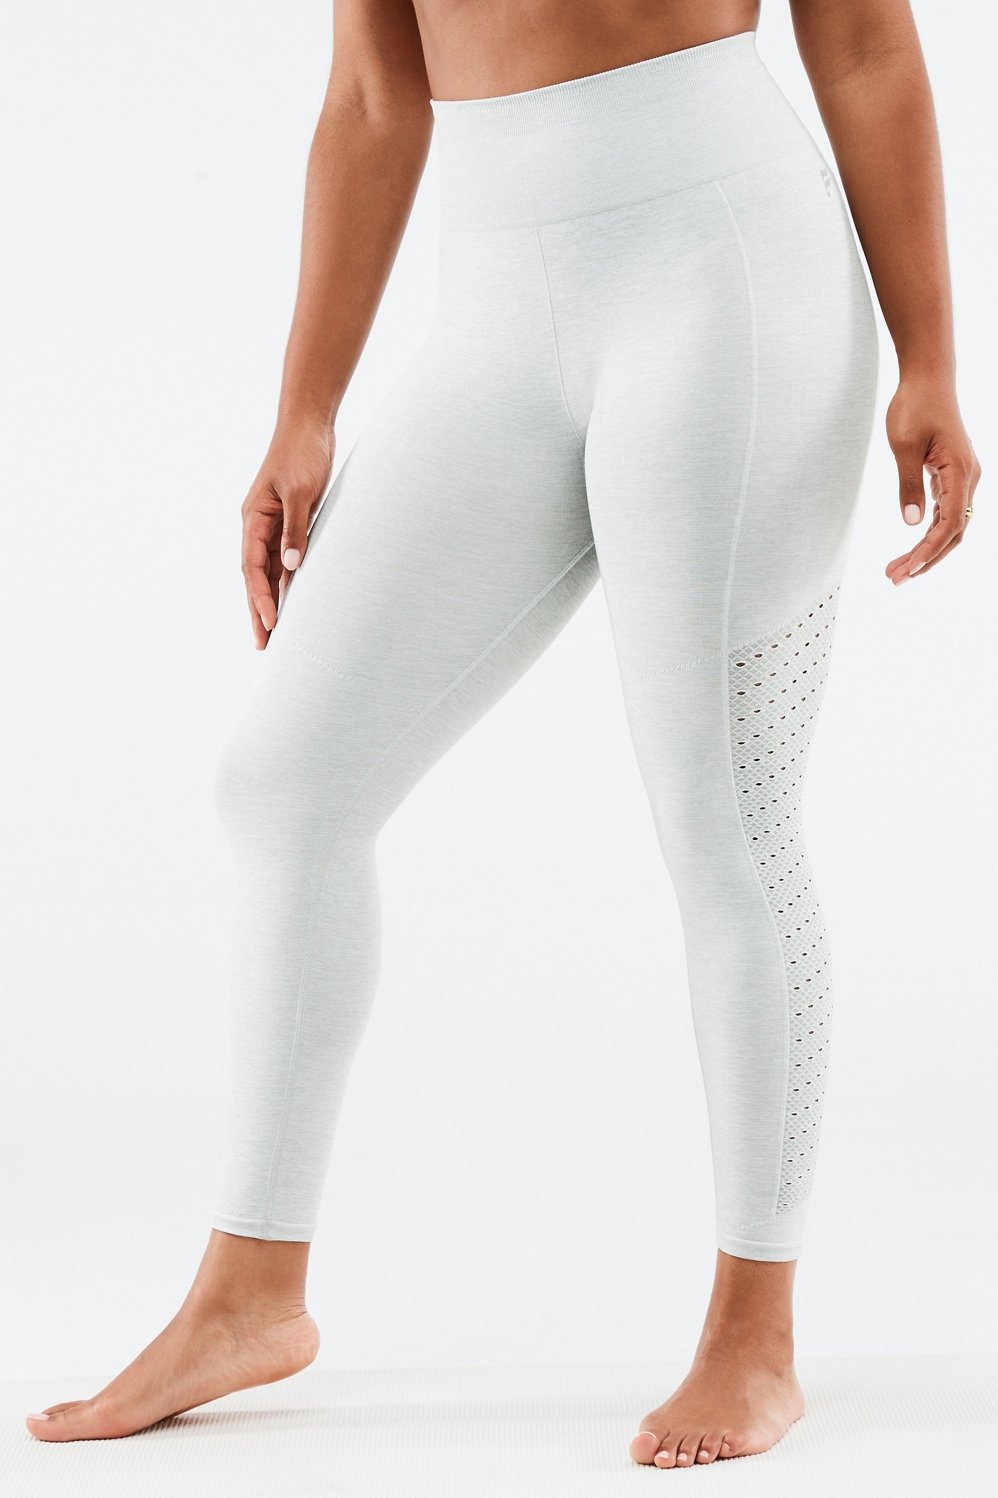 Fabletics highwaist seemless available Price 15000 Size large to